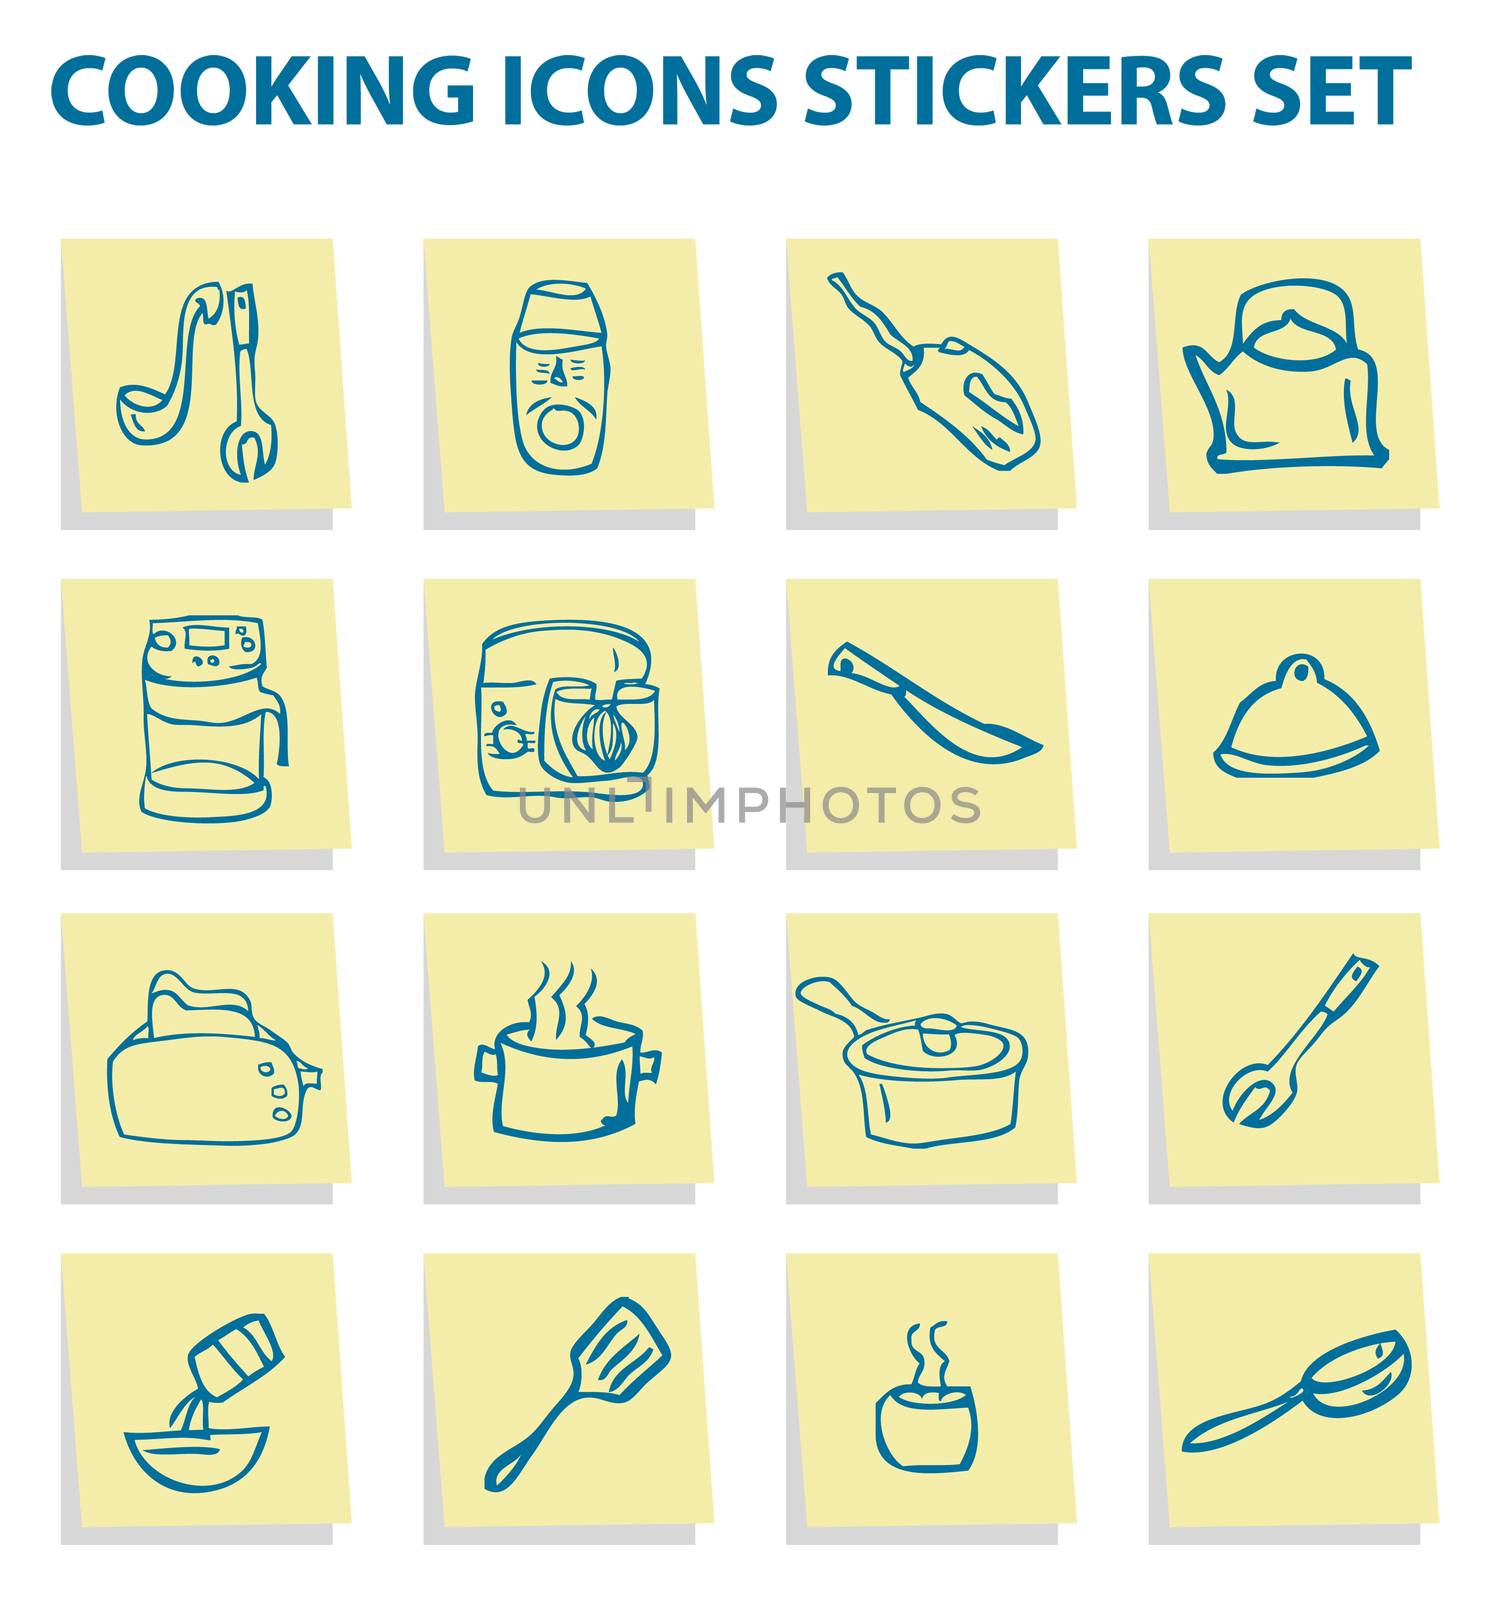 Cooking icons stickers set, kitchen elements 3 by IconsJewelry